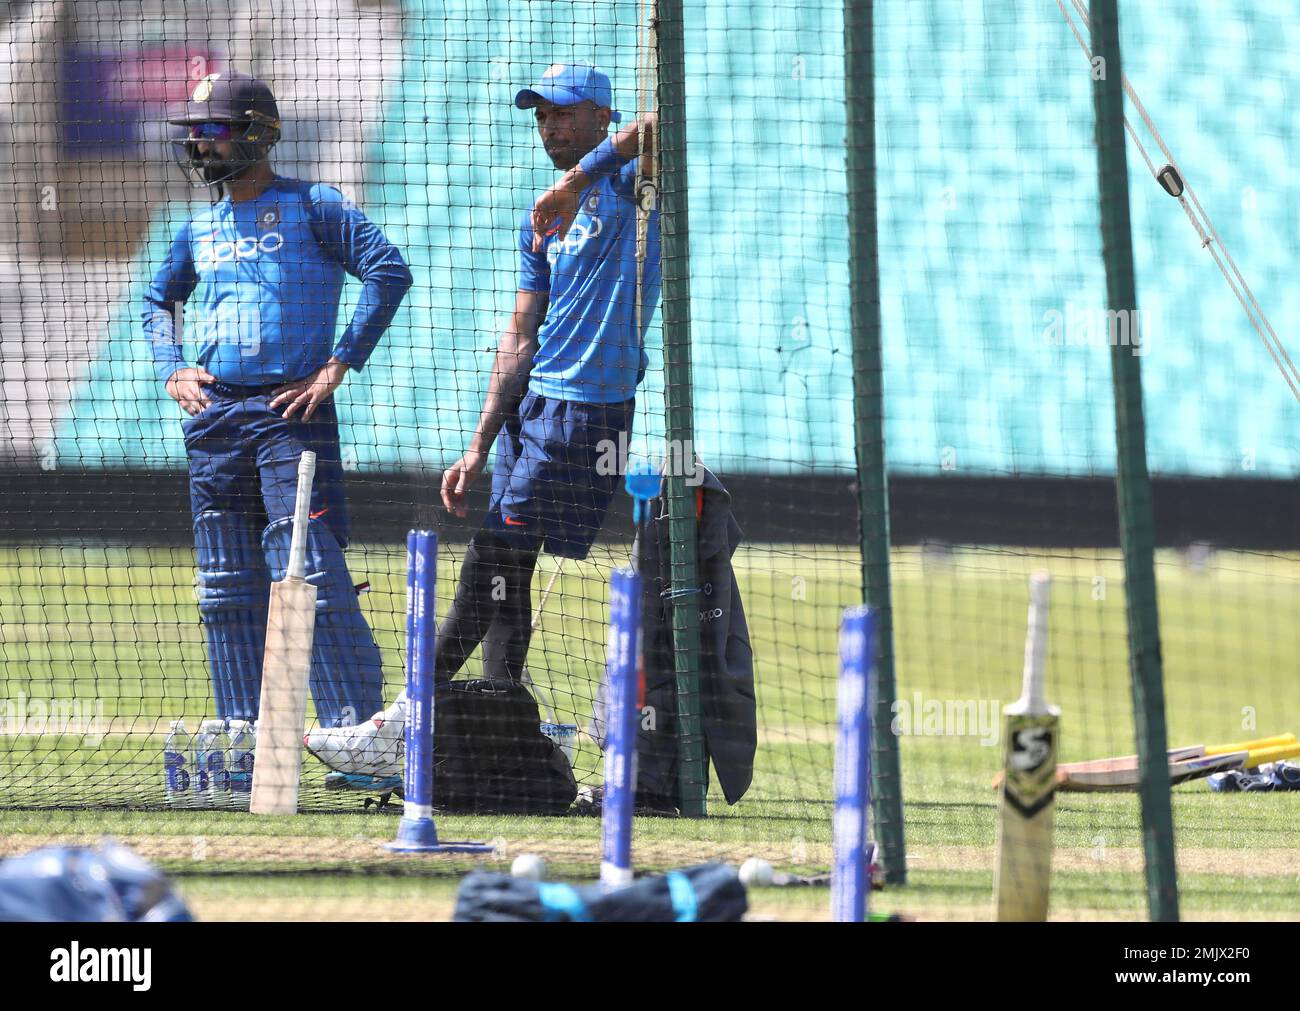 Indias Hardik Pandya, right, and Dinesh Karthik watch teammates bat in the nets during a training session at The Oval in London, Thursday, May 23, 2019